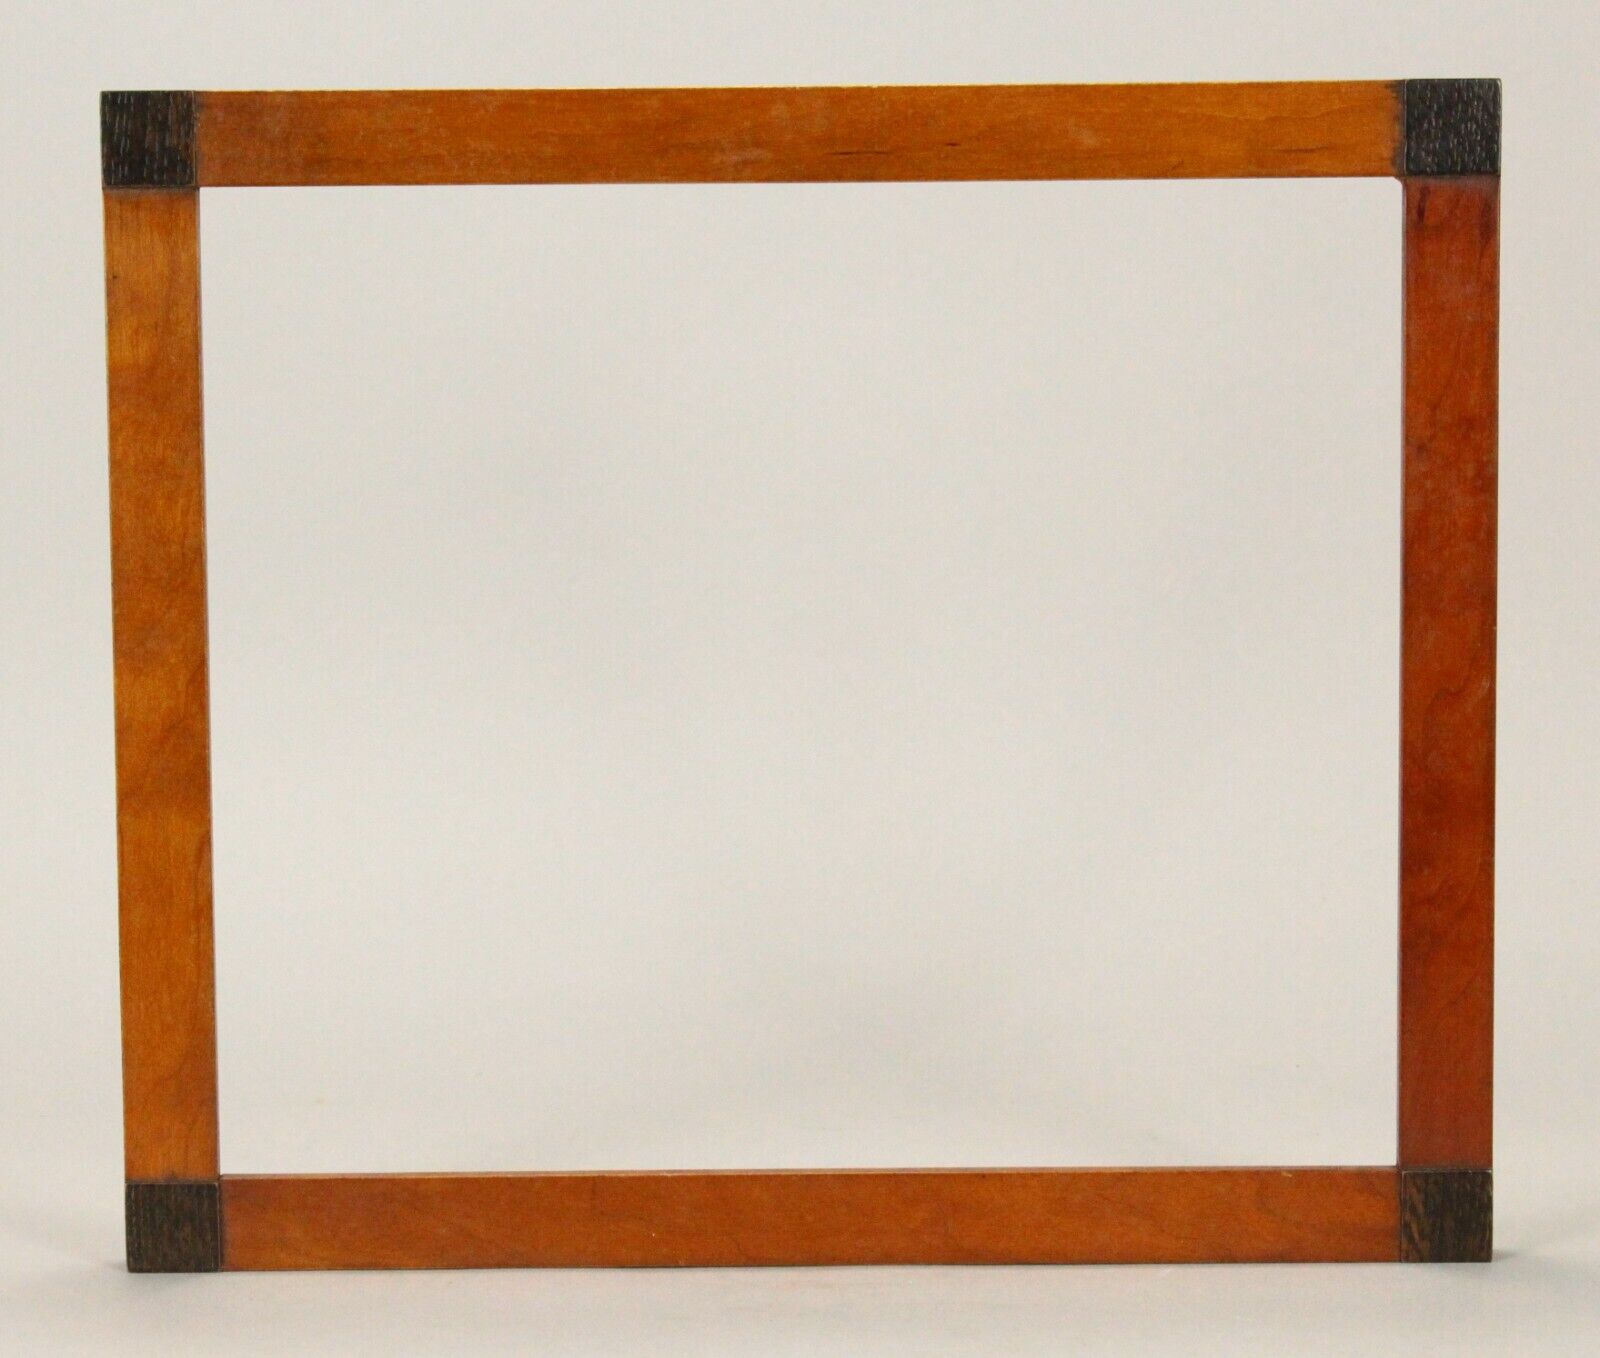 = Antique 18th/19th c. Georgian/Federal Satinwood Picture Frame